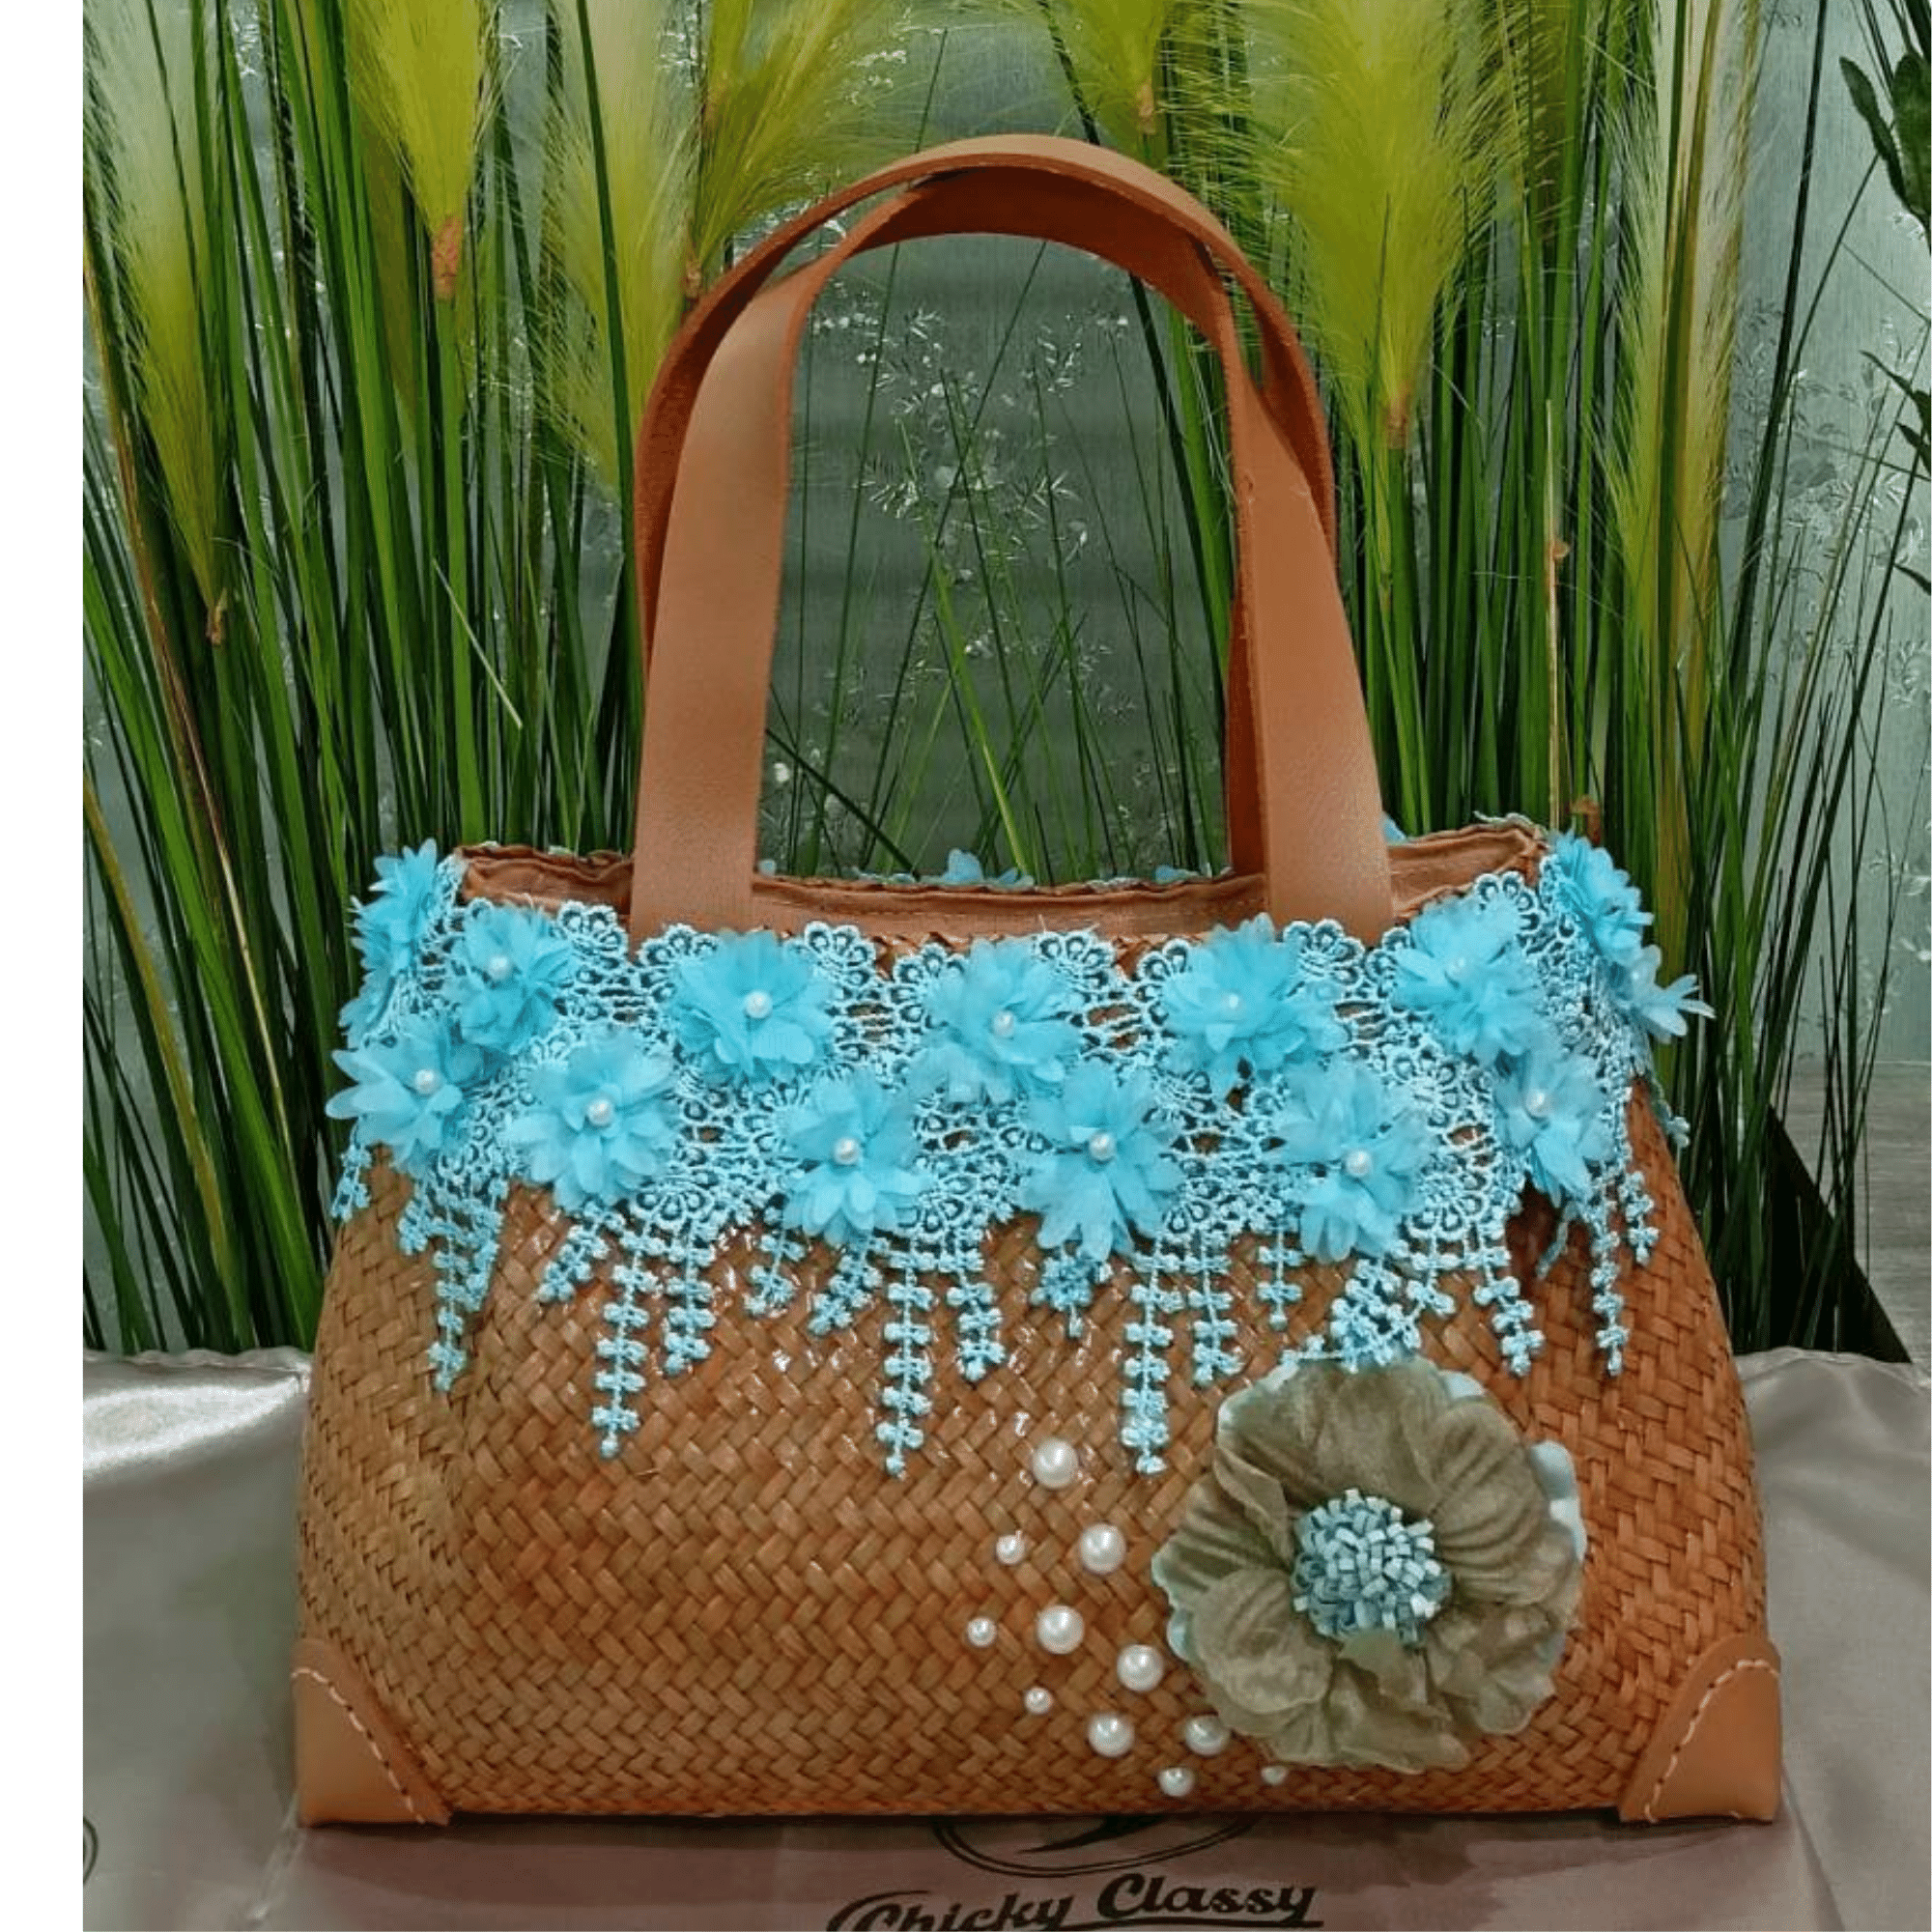 Elegant straw bag for mom on mothers day